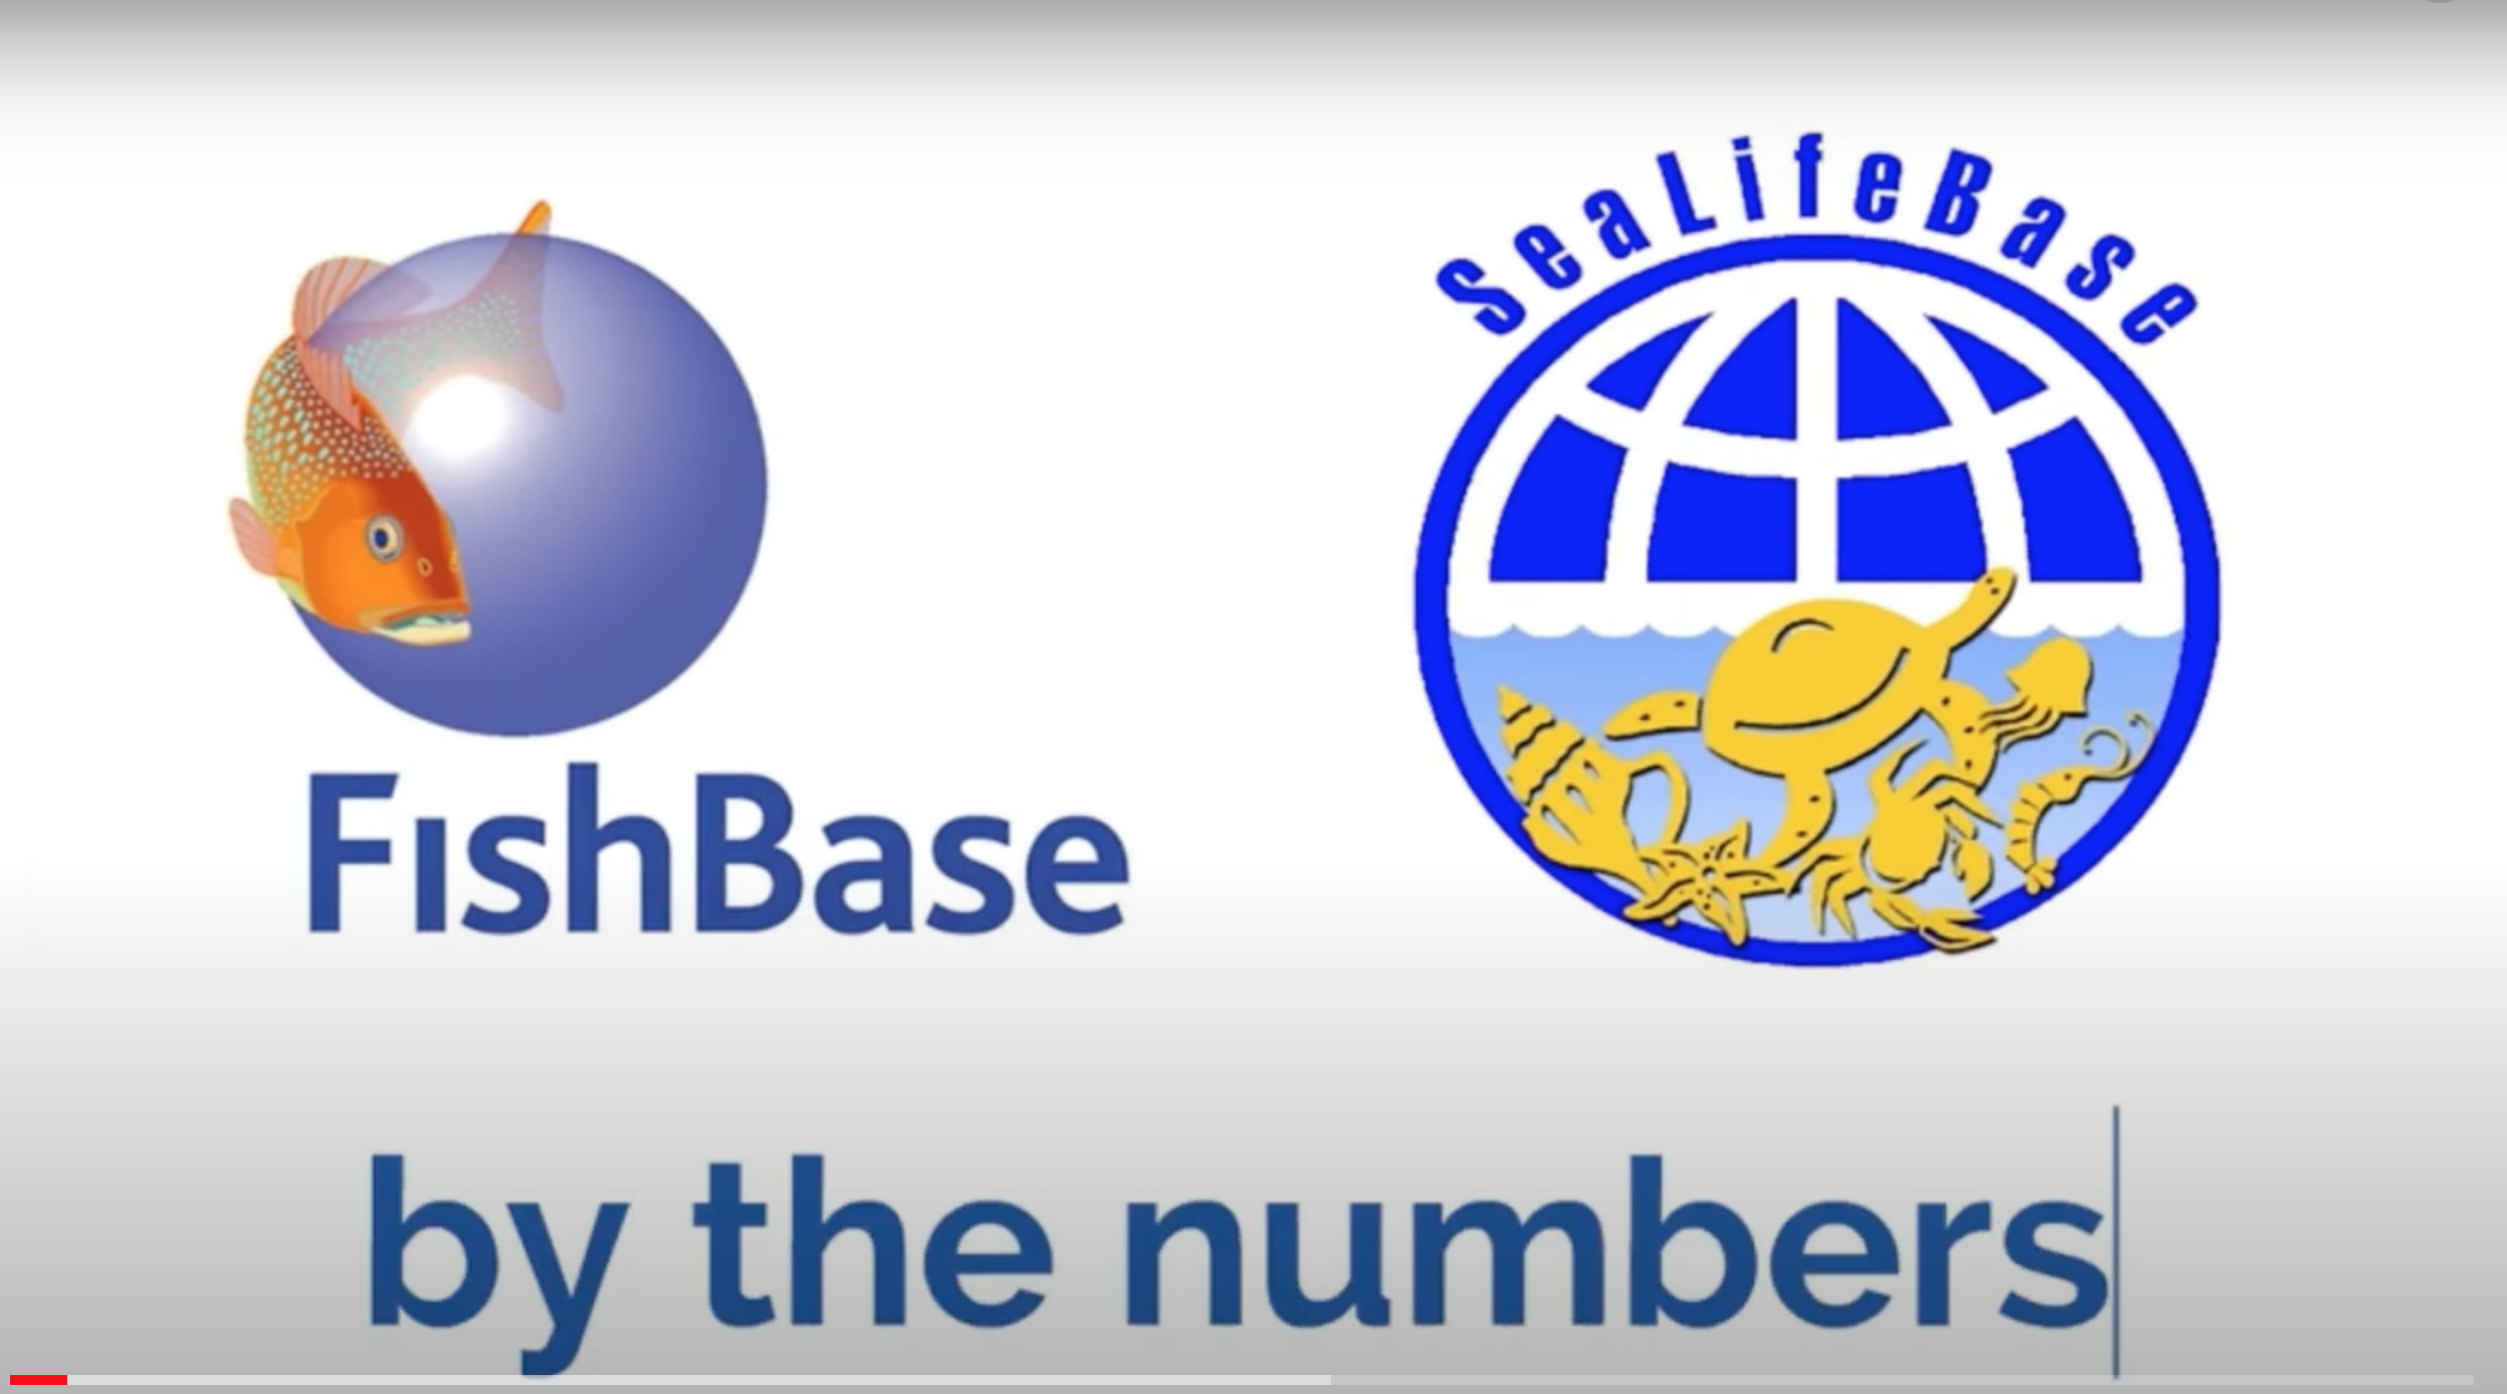 FishBase and SeaLifeBase by the numbers